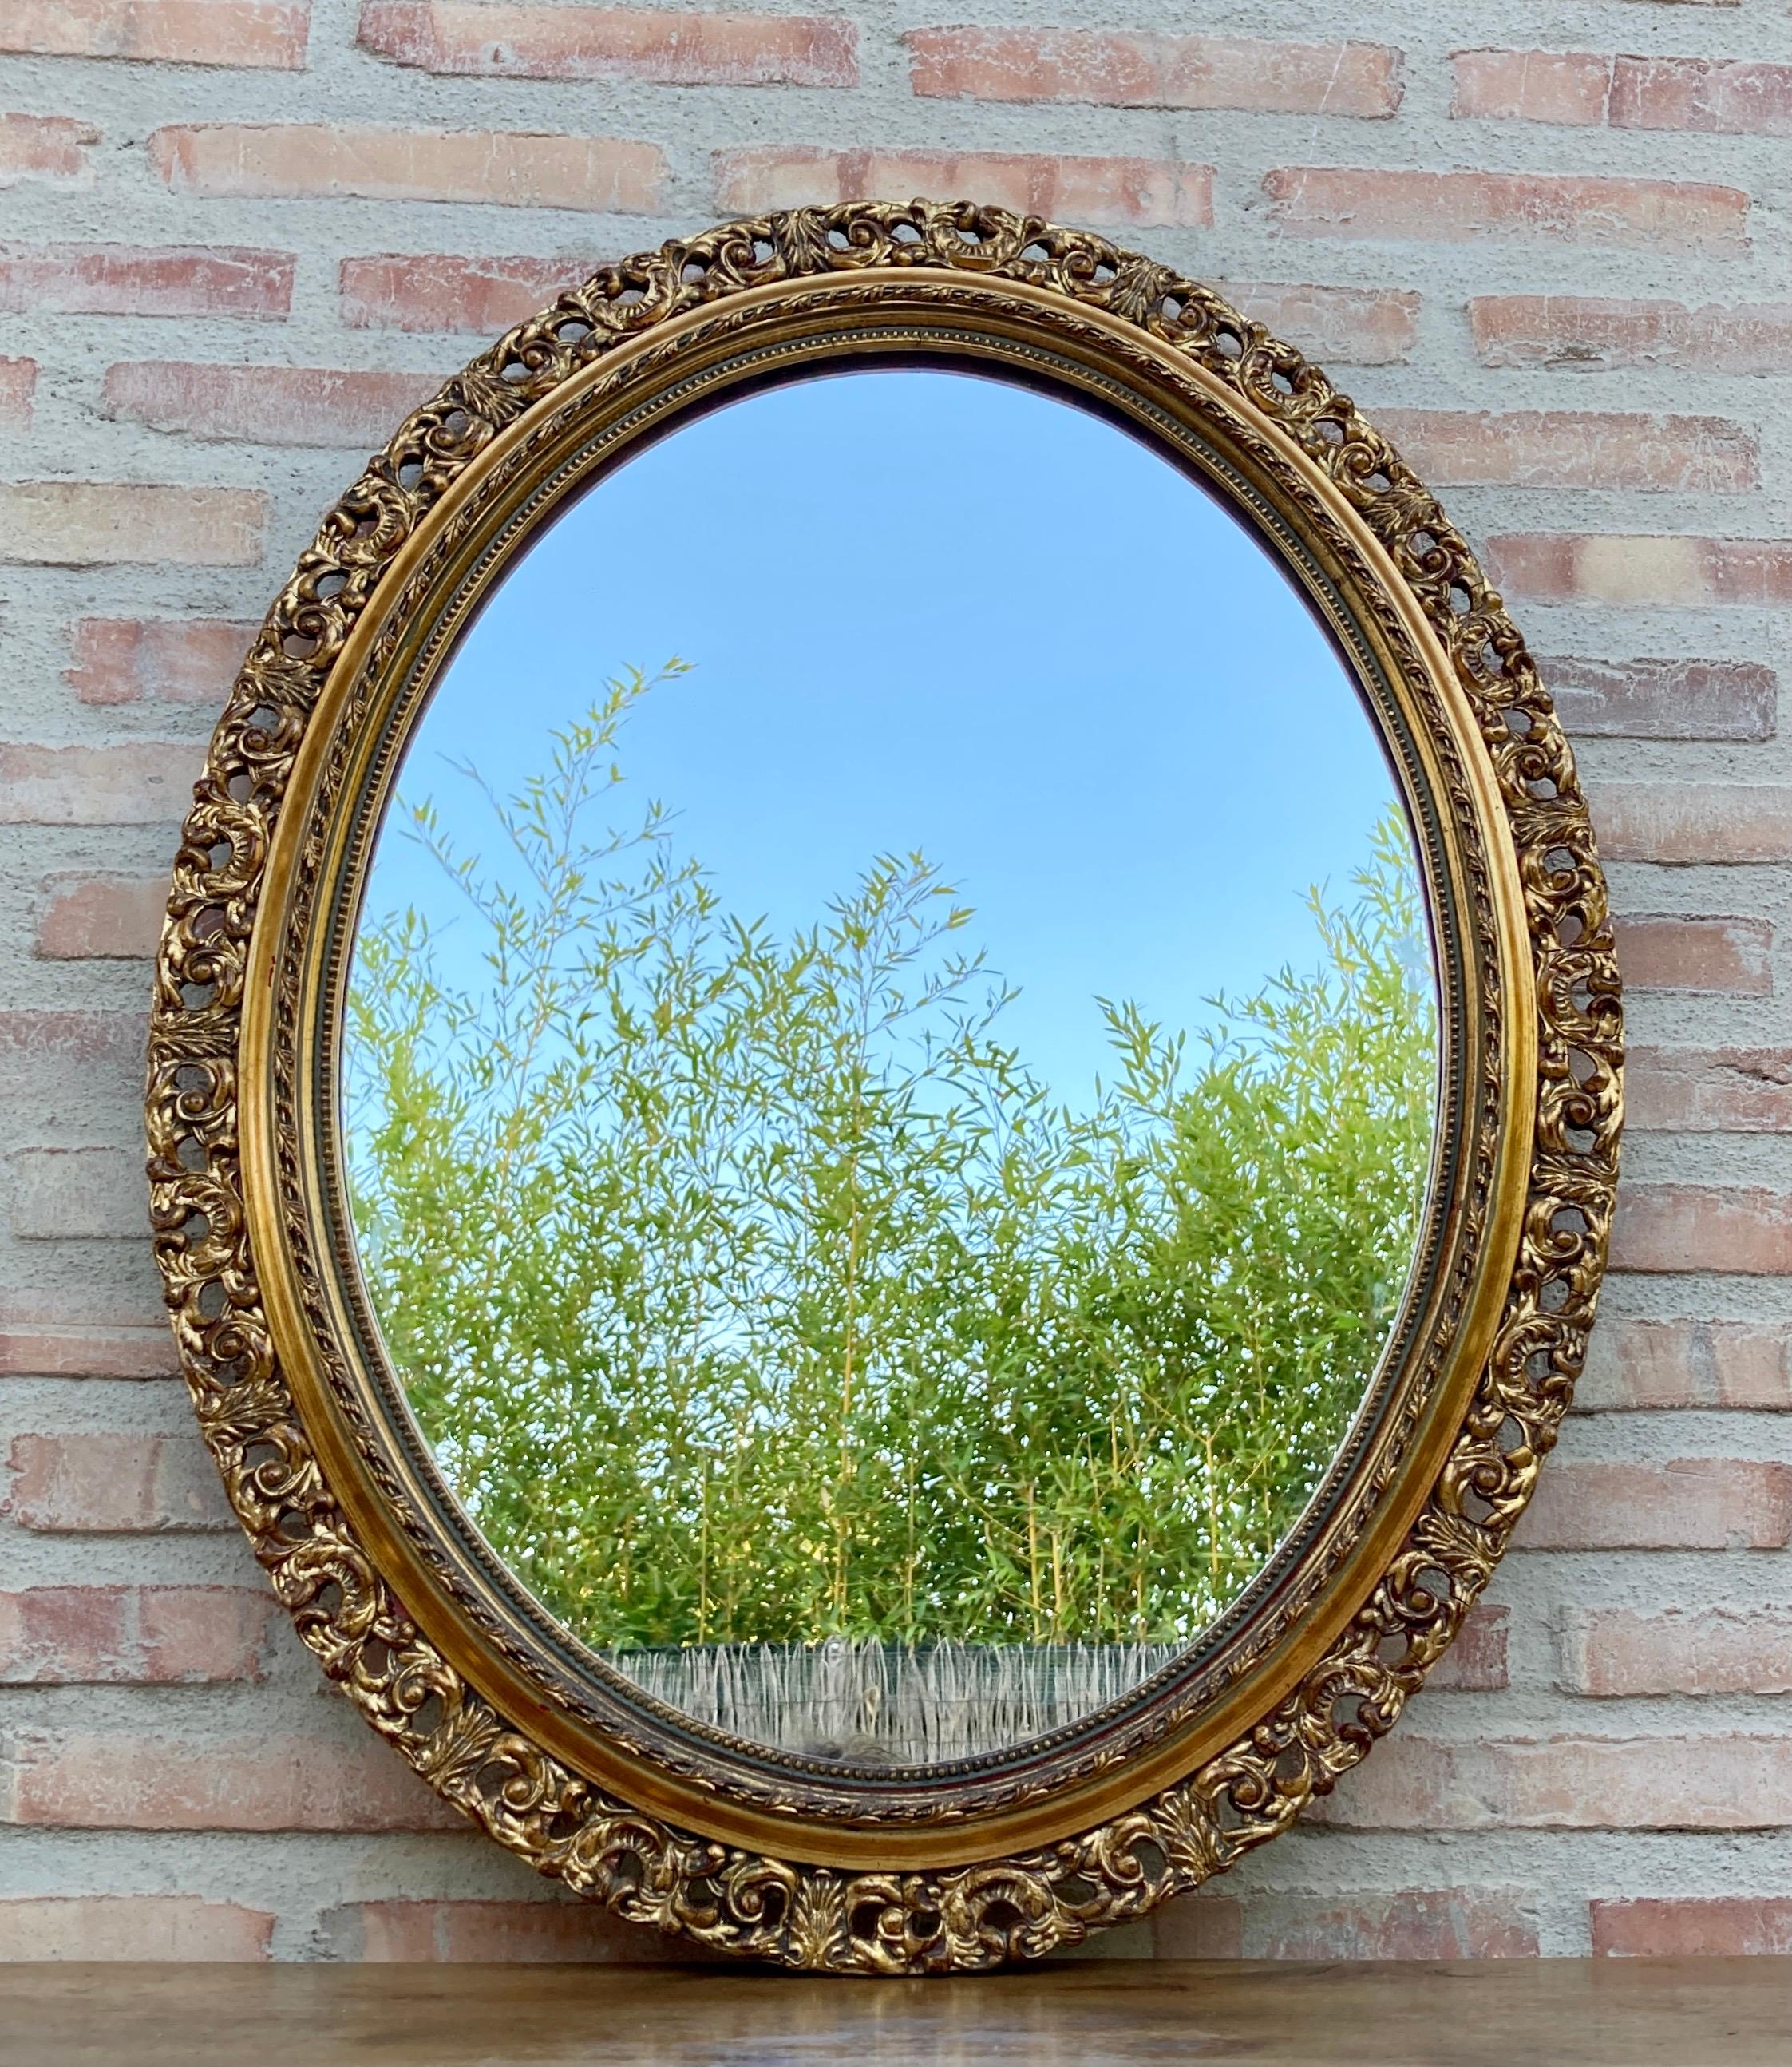 A magnificent oval shaped gold mirror, which has a mirror in perfect condition for use.
Its beautifully carved gilt wood frame with beads and gadroon with a central floral ridge surrounding the entire frame. This antique wall mirror retains its